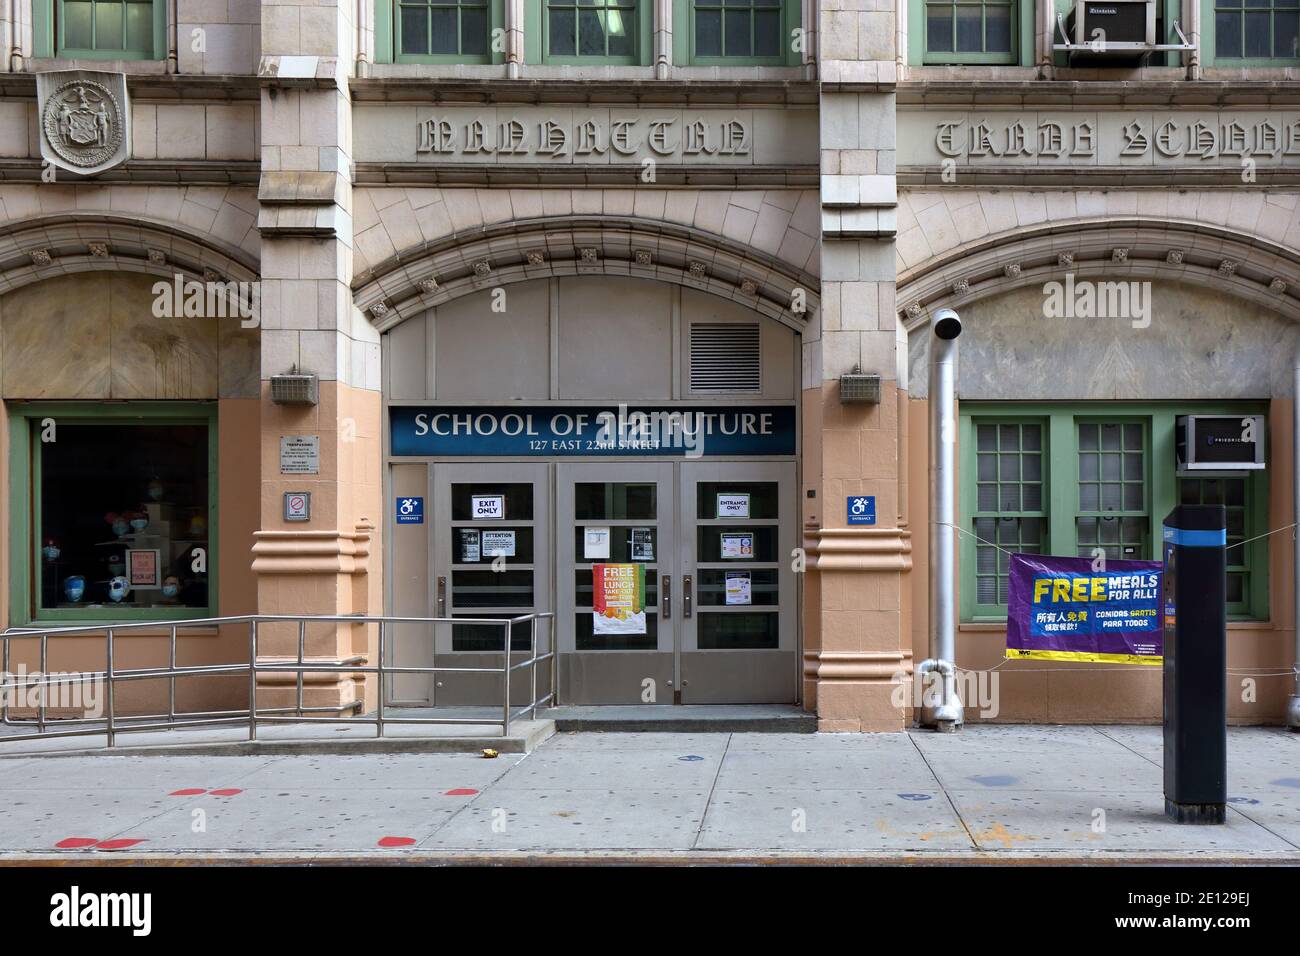 School of the Future, 127 E 22nd St, New York, NYC storefront photo of a public school in Manhattan. Stock Photo